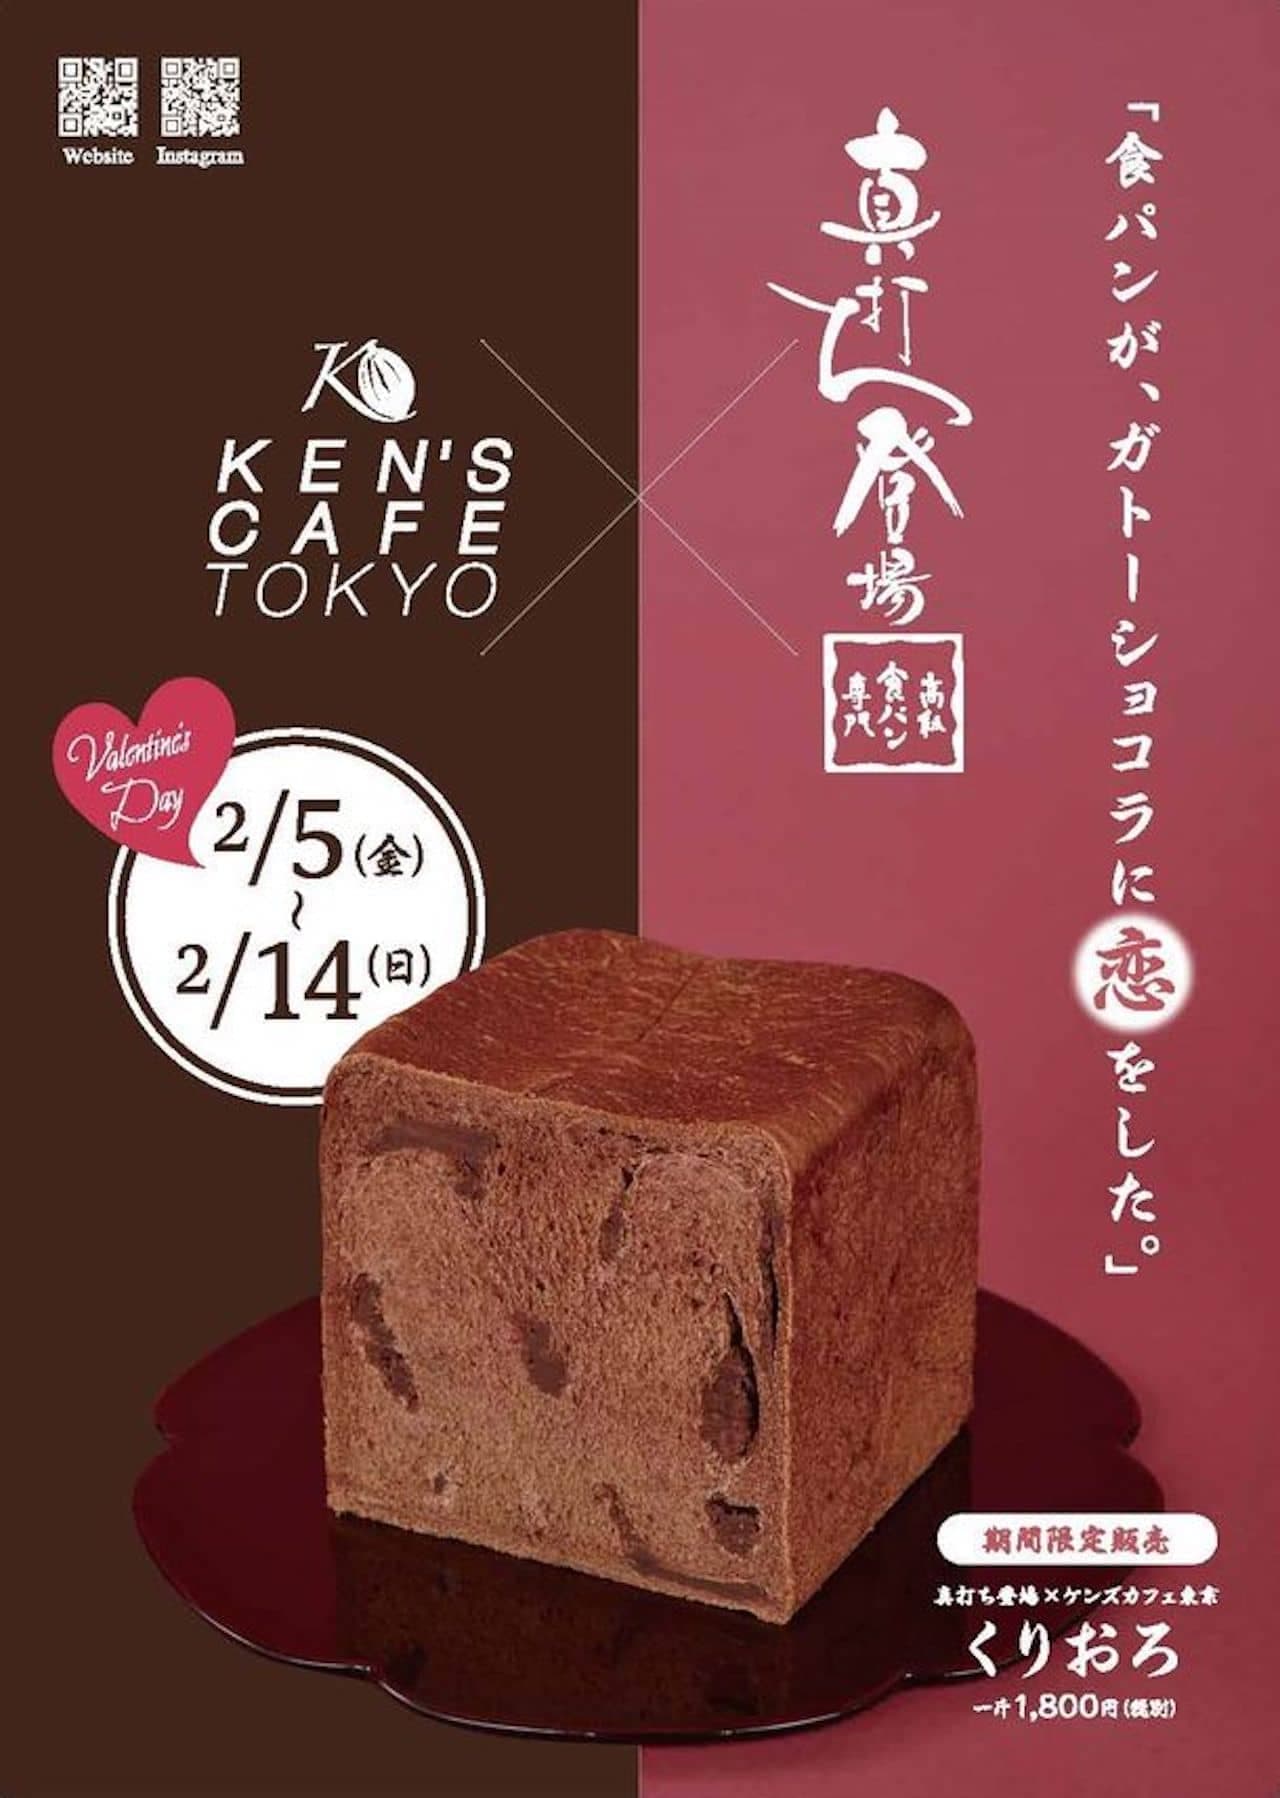 "Blessed chocolate bread-Kurioro-" is now available x KEN'S CAFE TOKYO limited collaboration bread